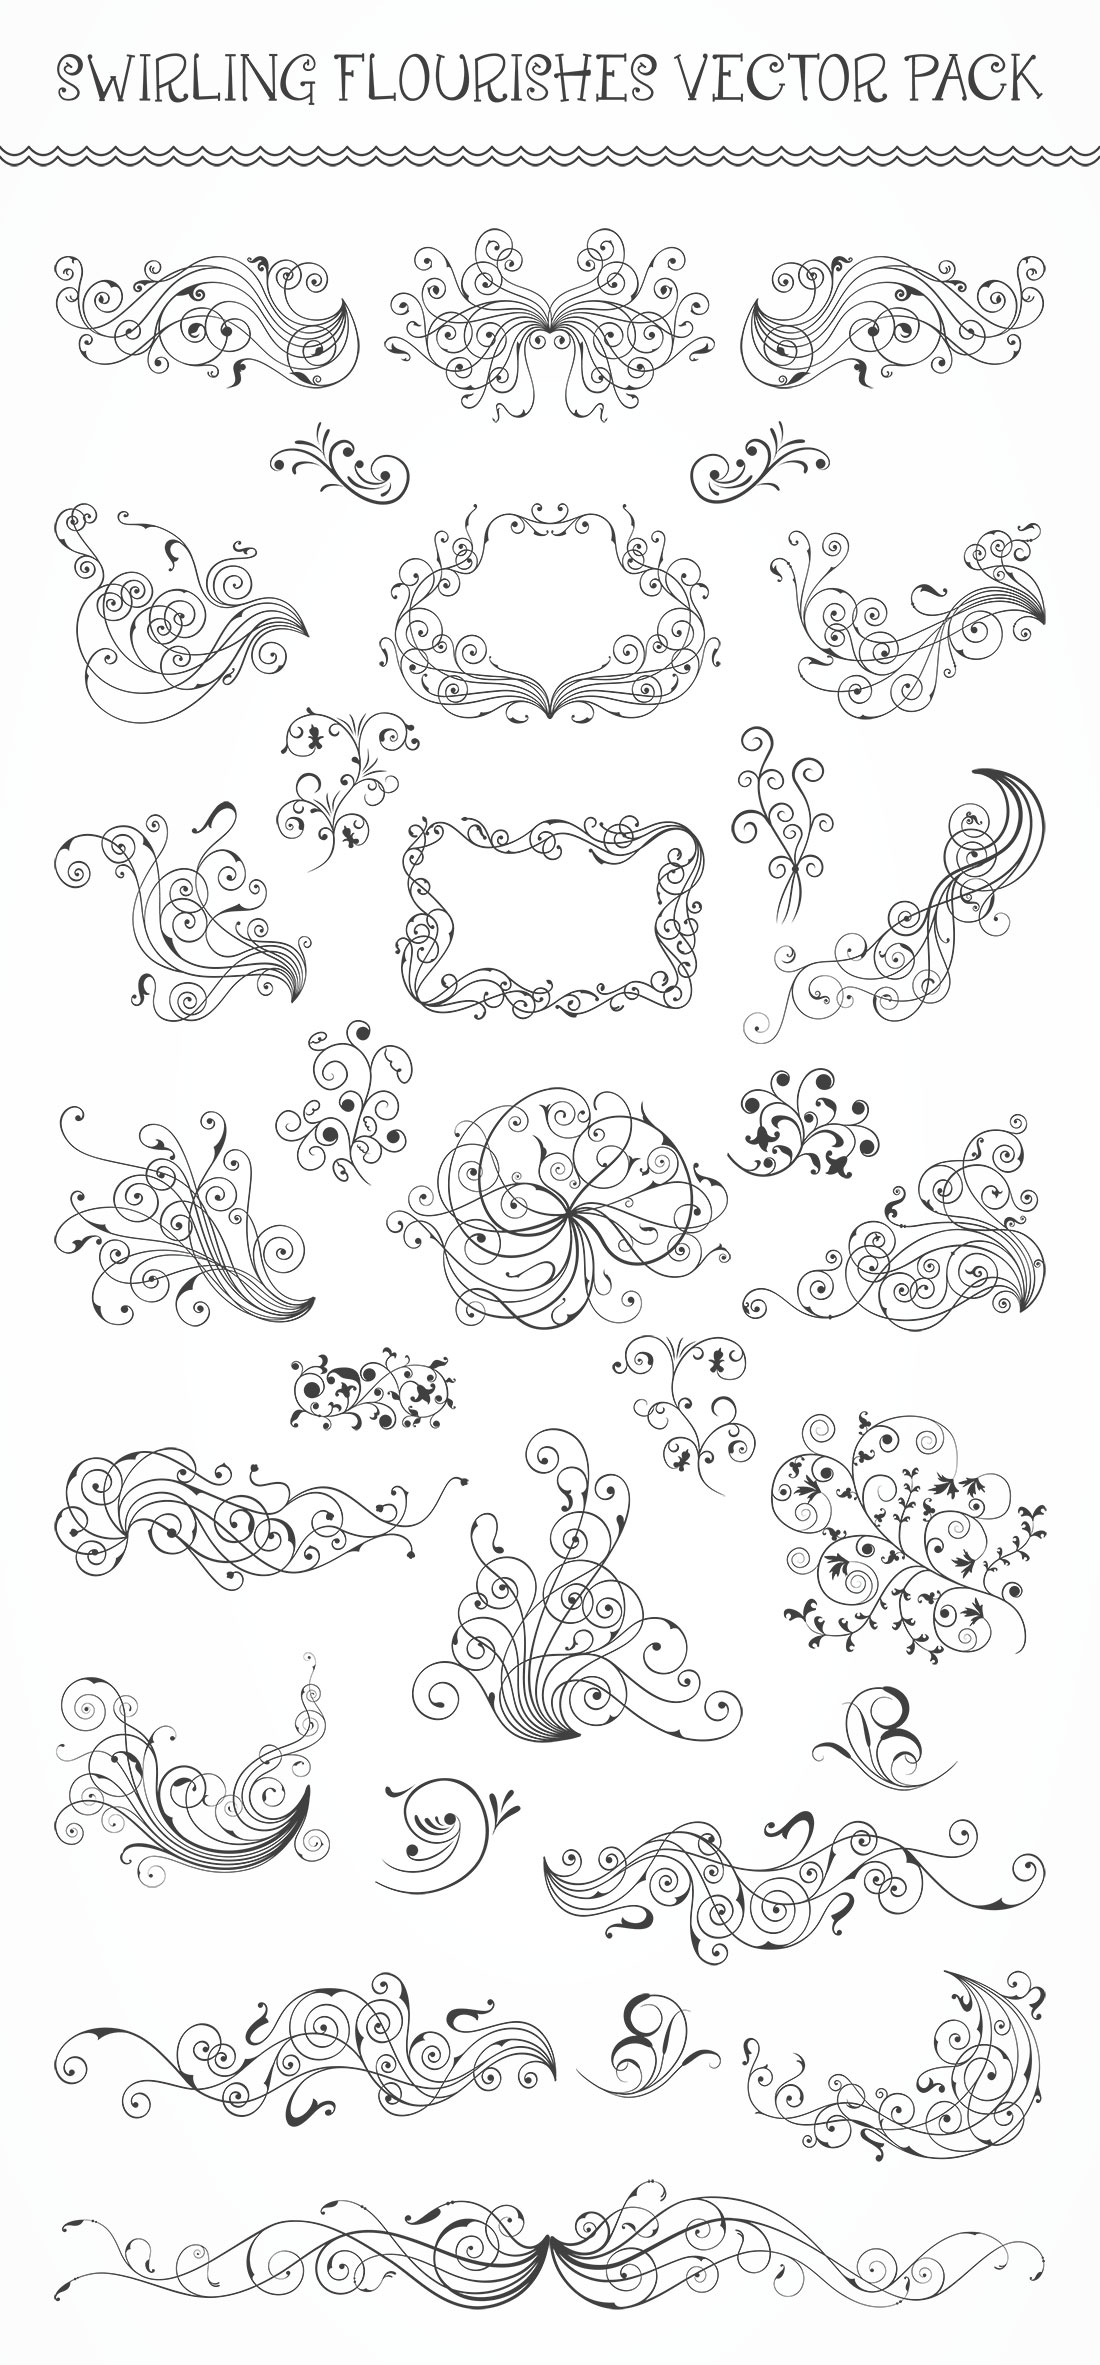 Swirling Flourishes Vector